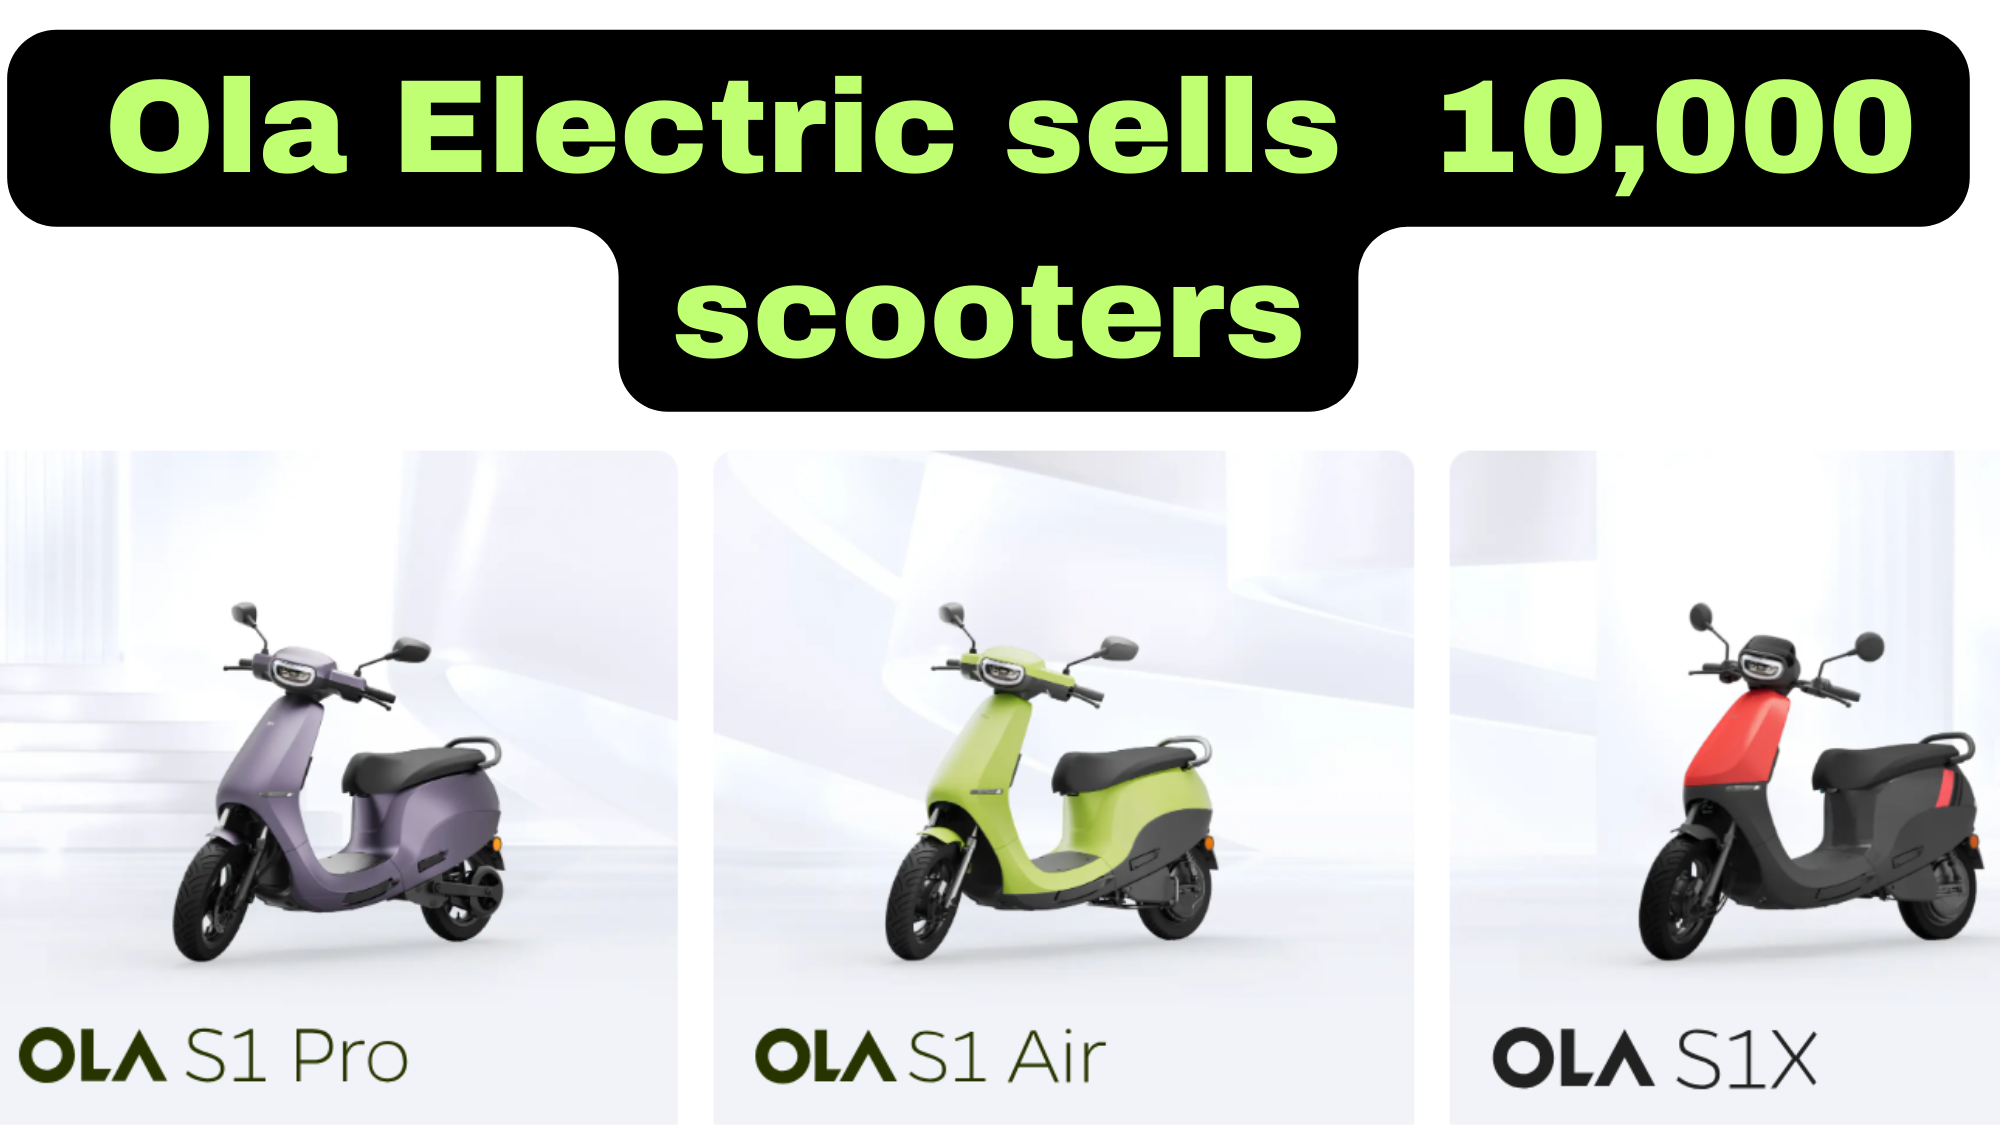 The Rise of Ola Electric; 10,000 scooters sells,